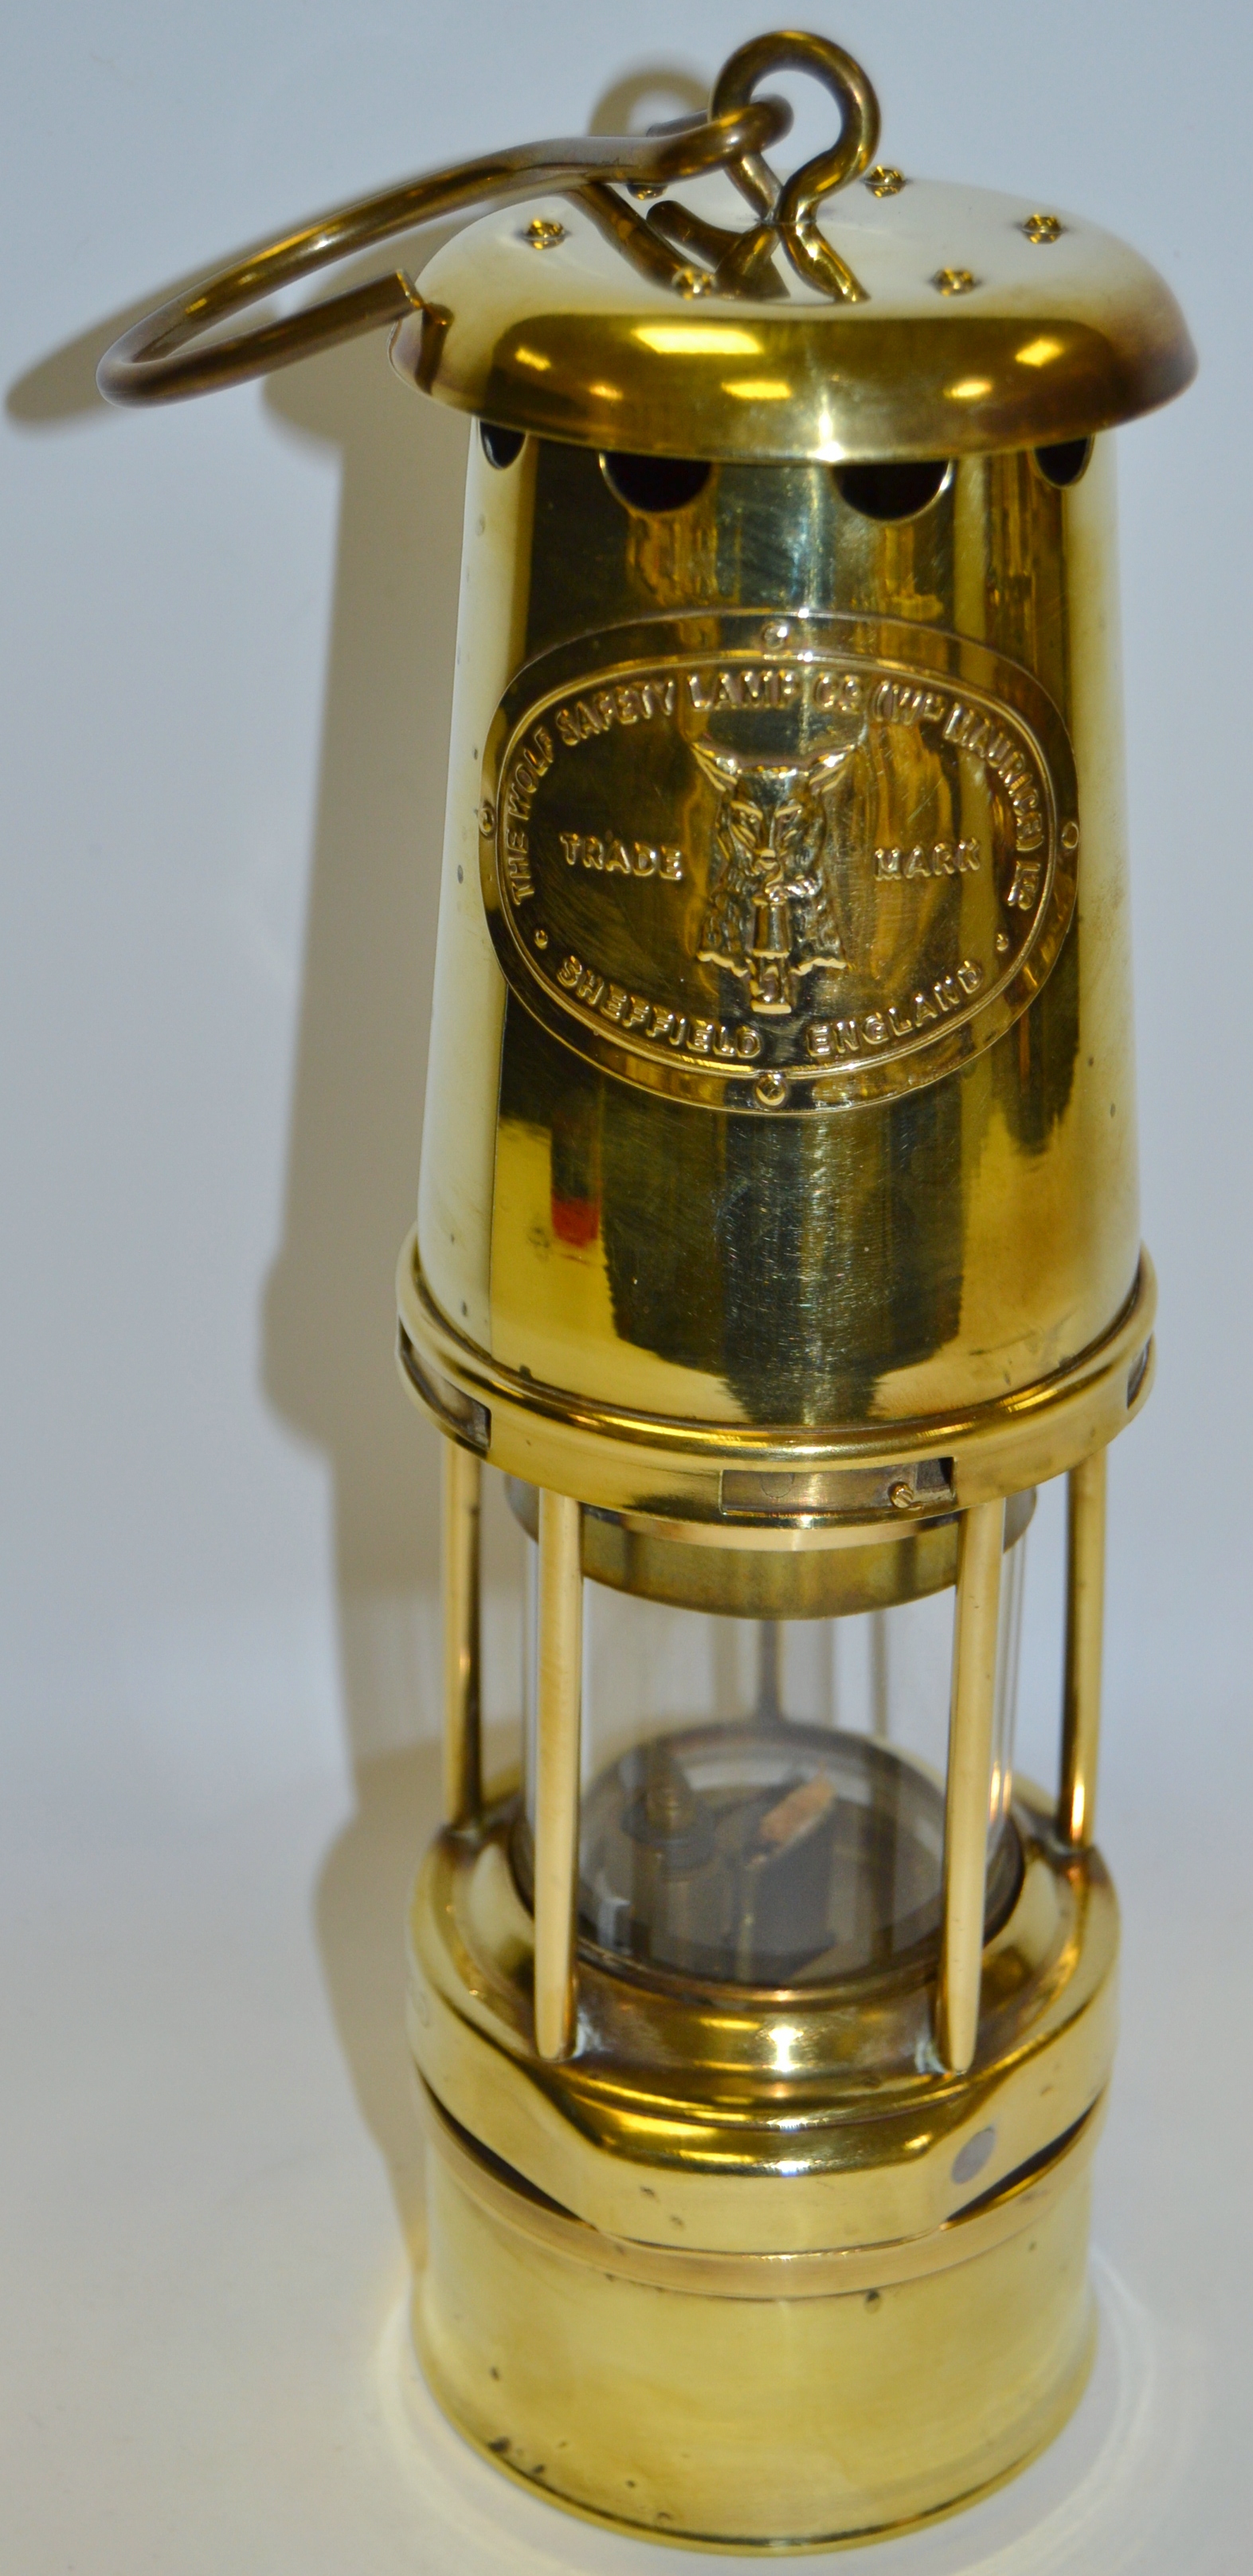 The Wolf Safety lamp no 7.R.